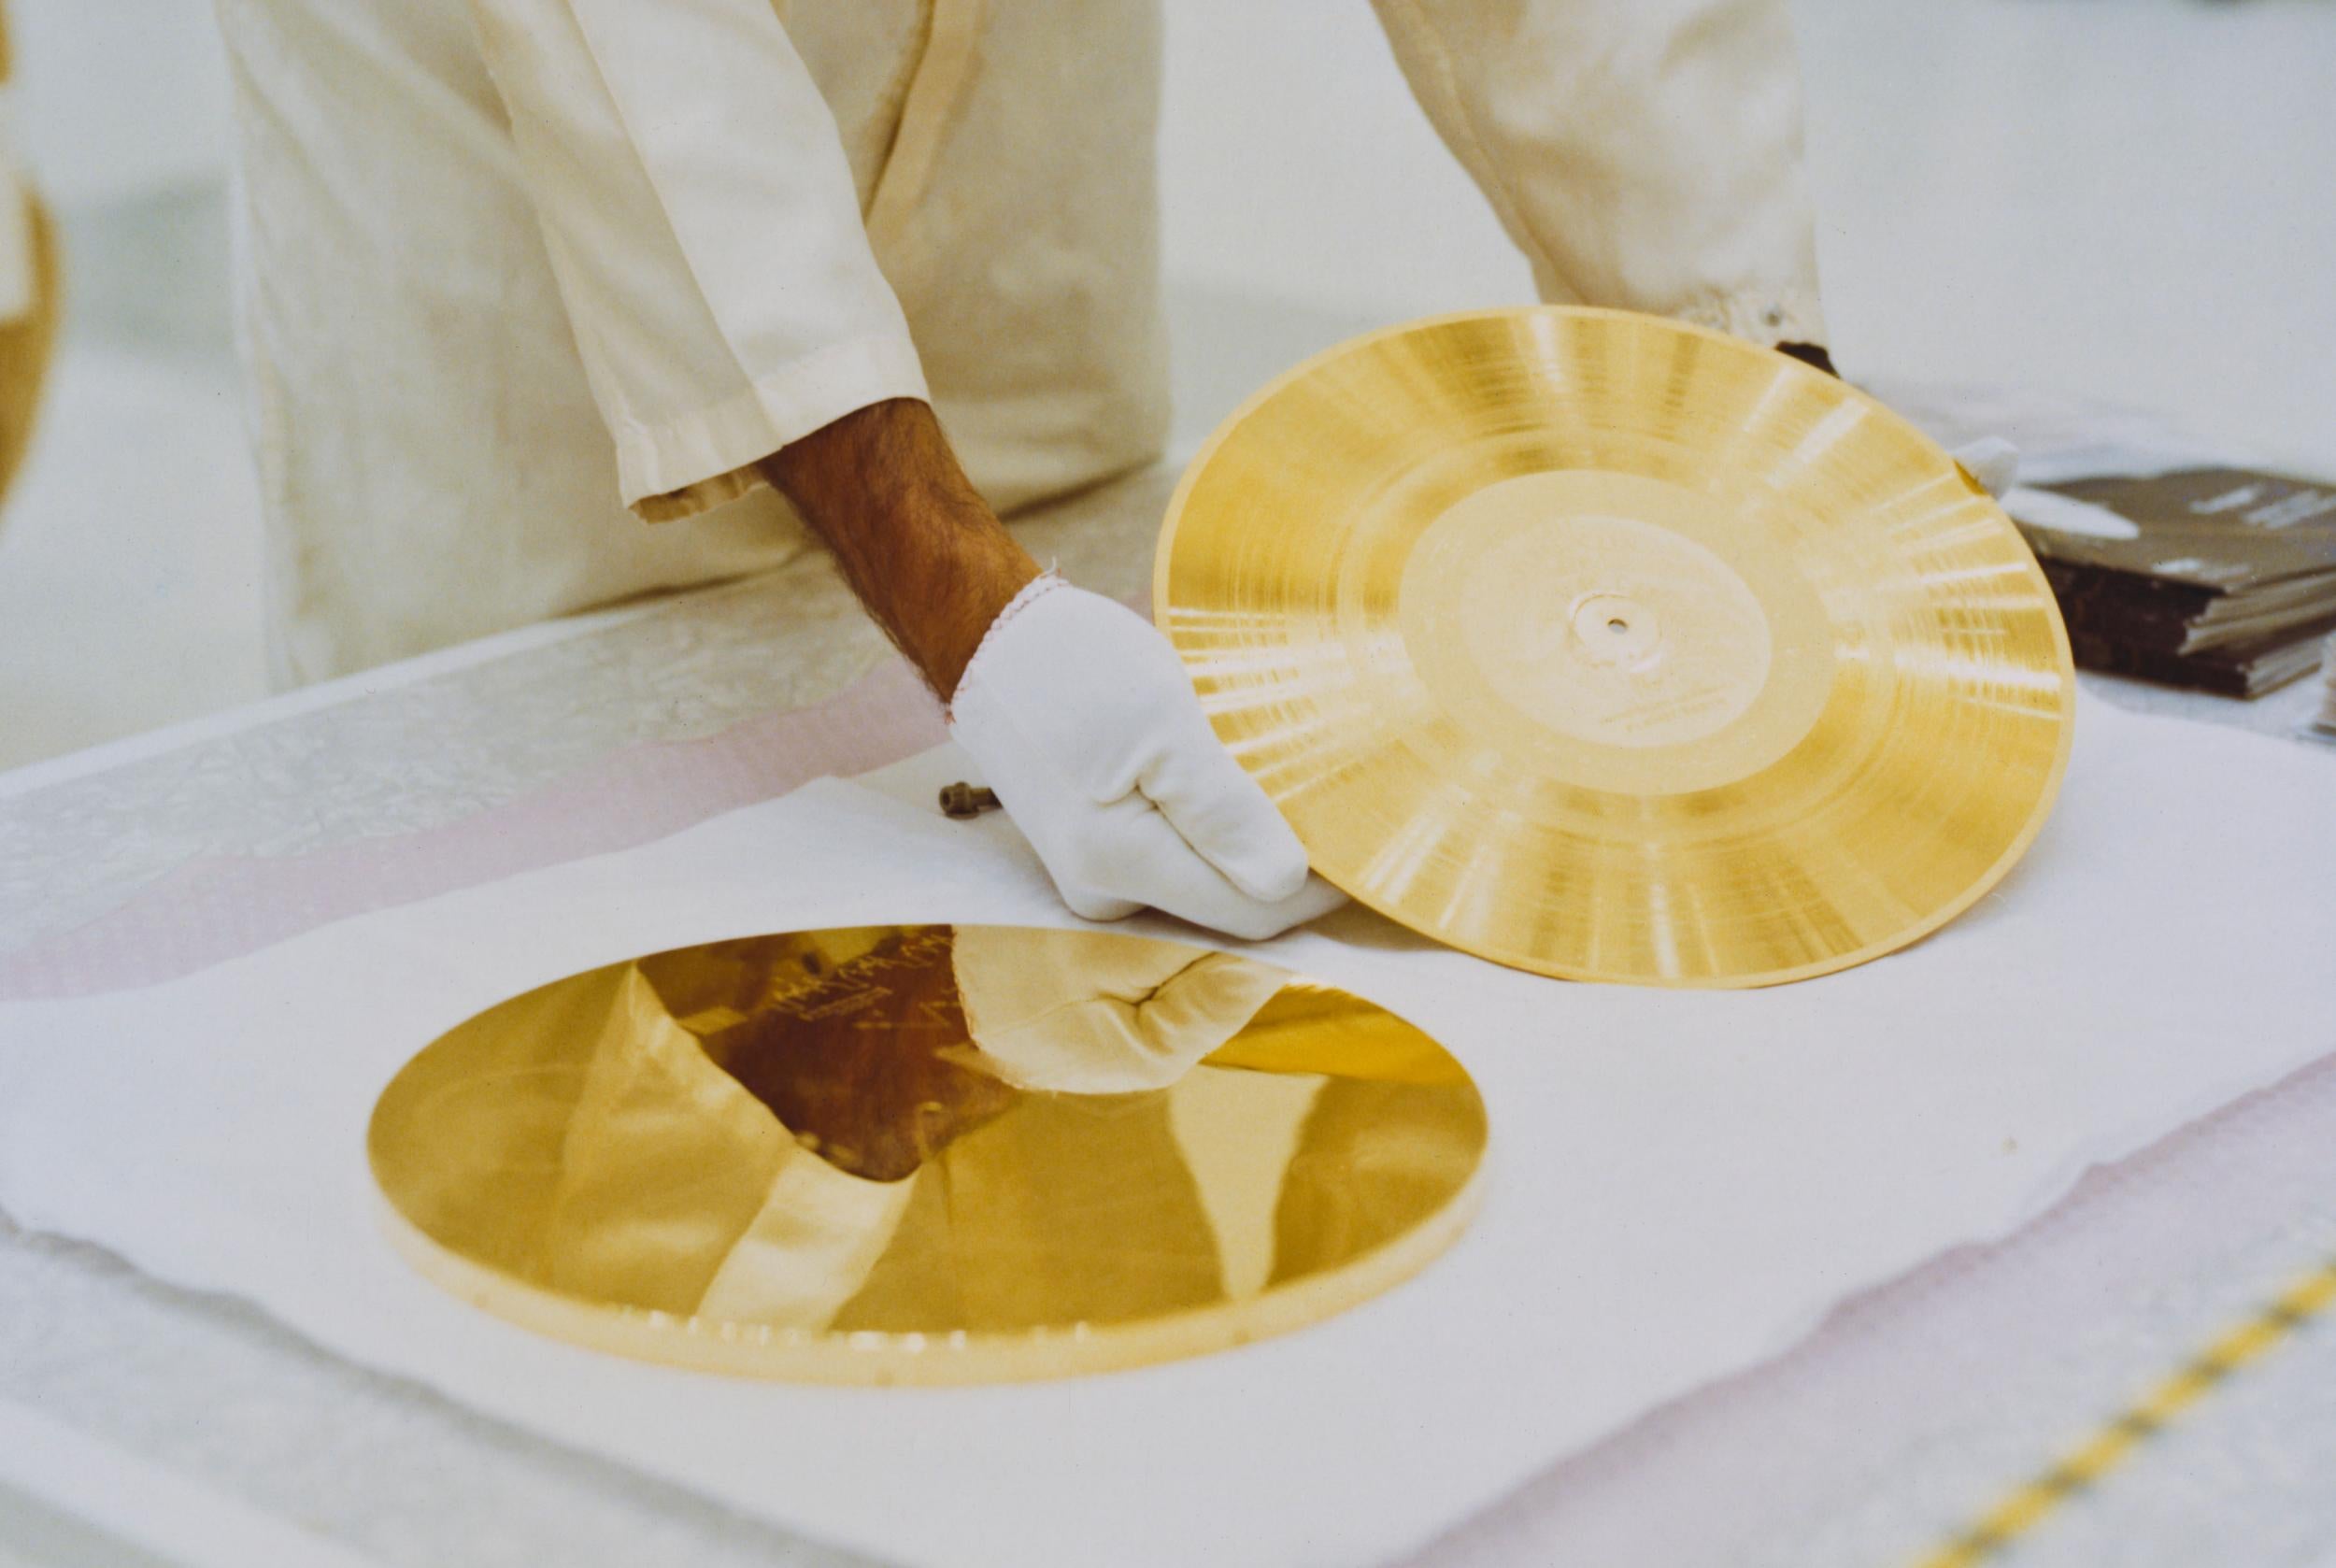 One of the Golden Records before being attached to the Voyager probe